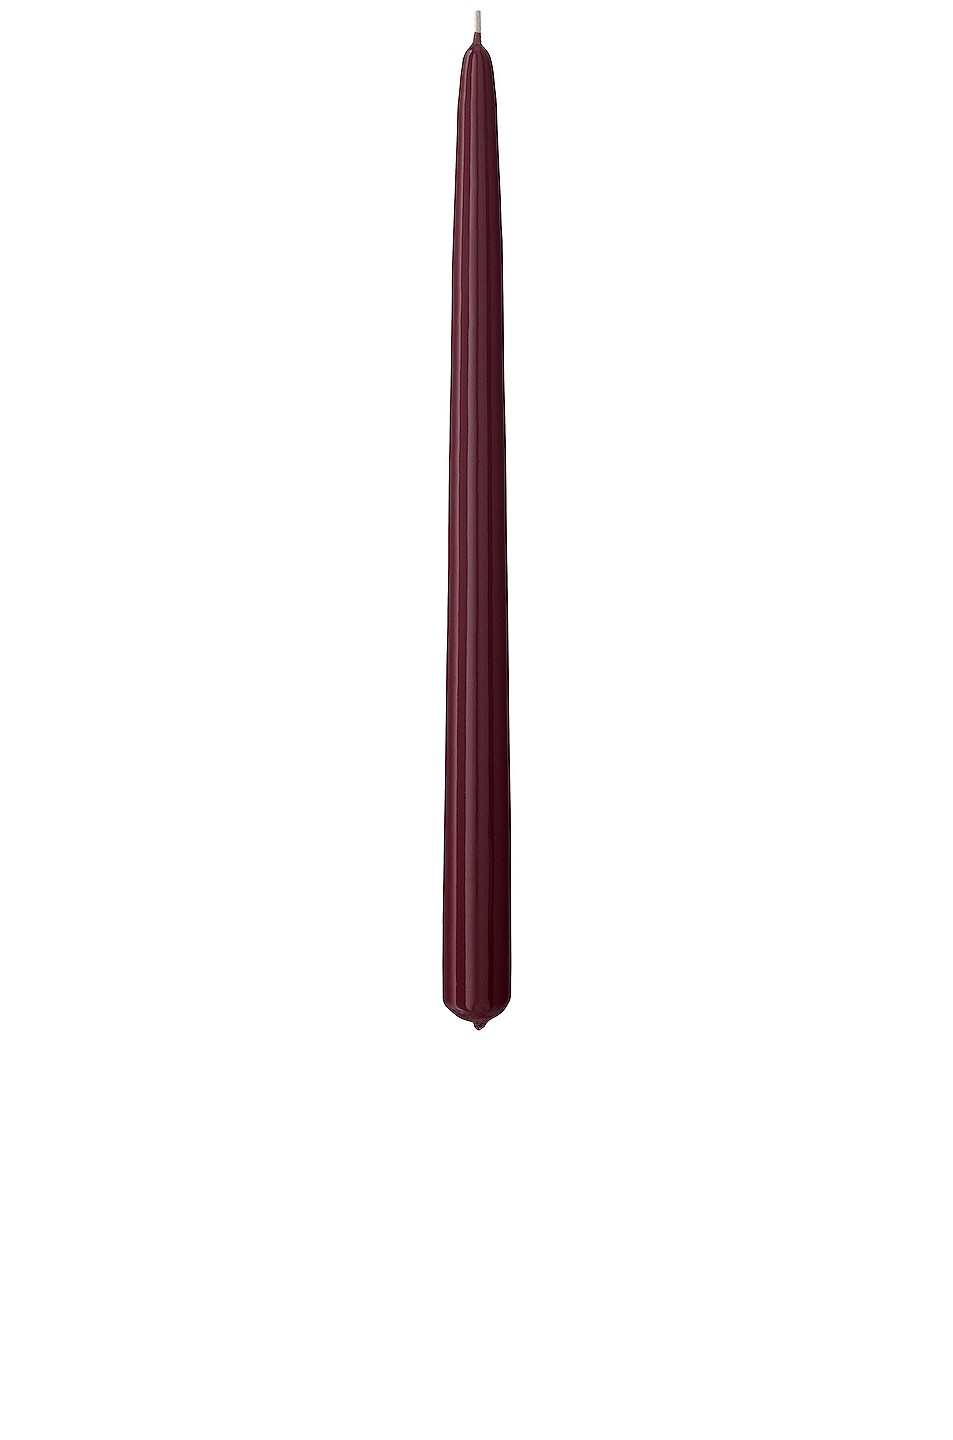 Image 1 of AYTM Lux Set of 4 Tapered Candles in Bordeaux